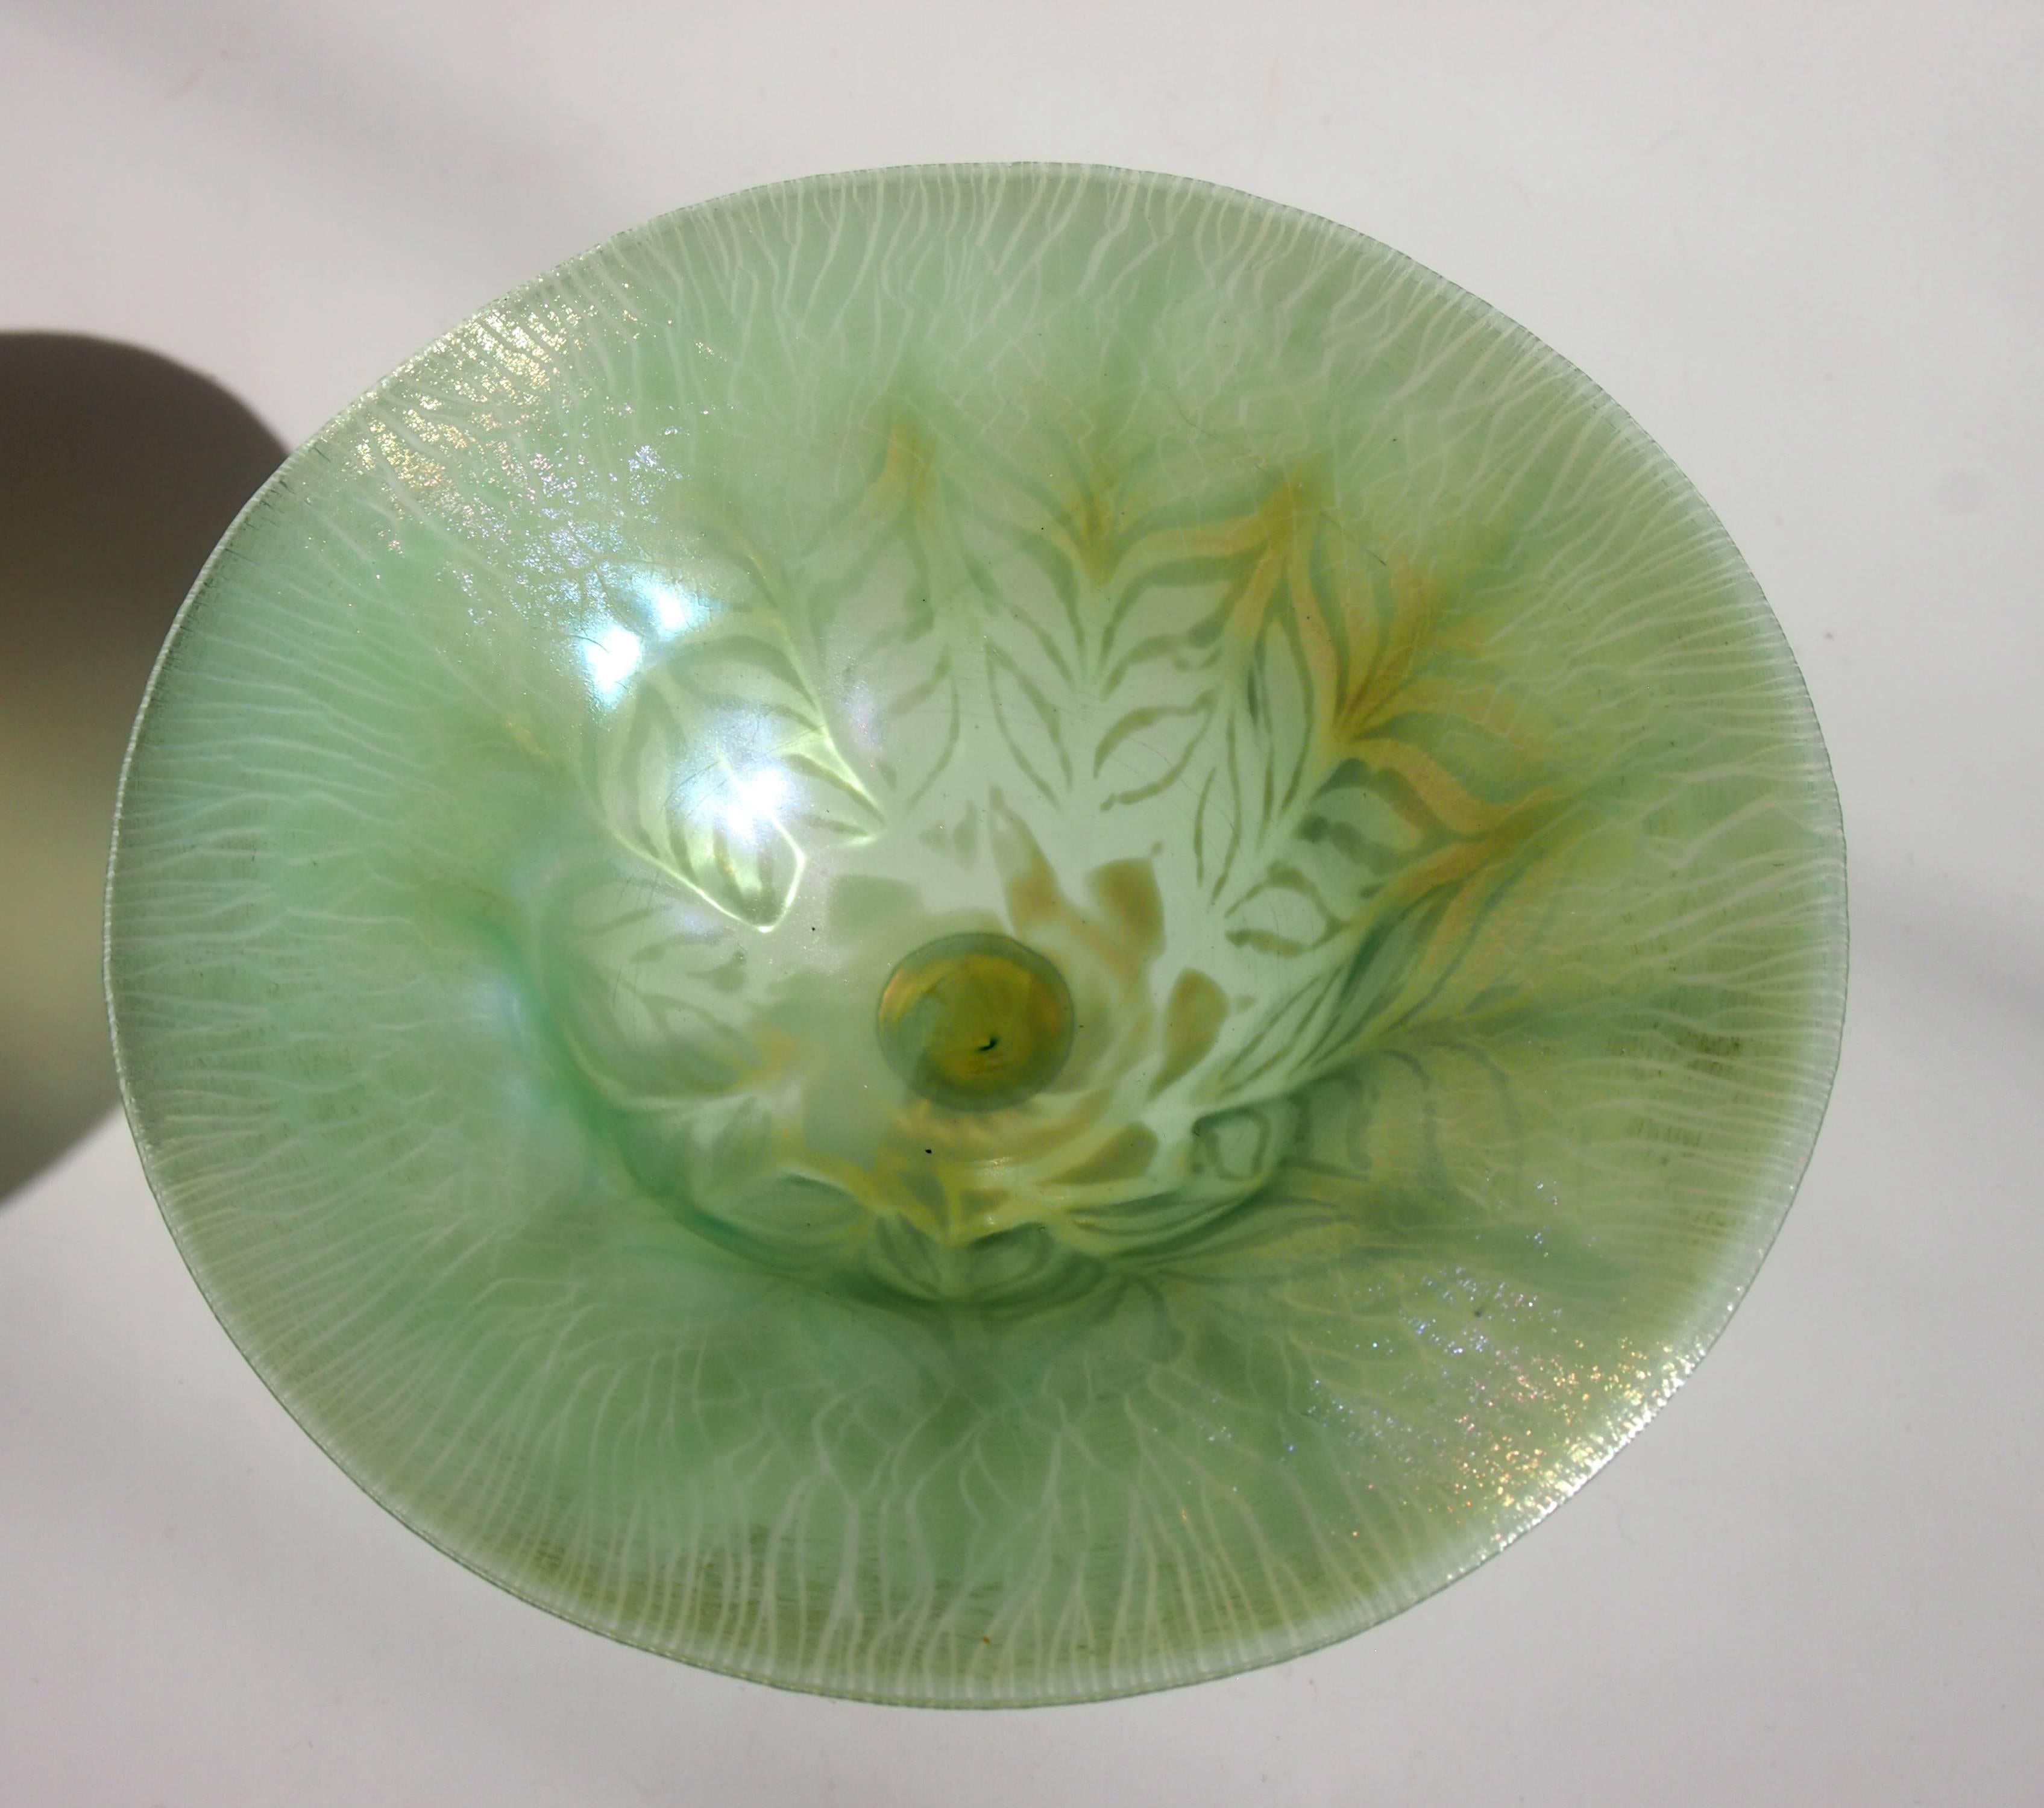 Early 20th Century L C Tiffany Art Nouveau Green and Opal Pastel Favrile Compote